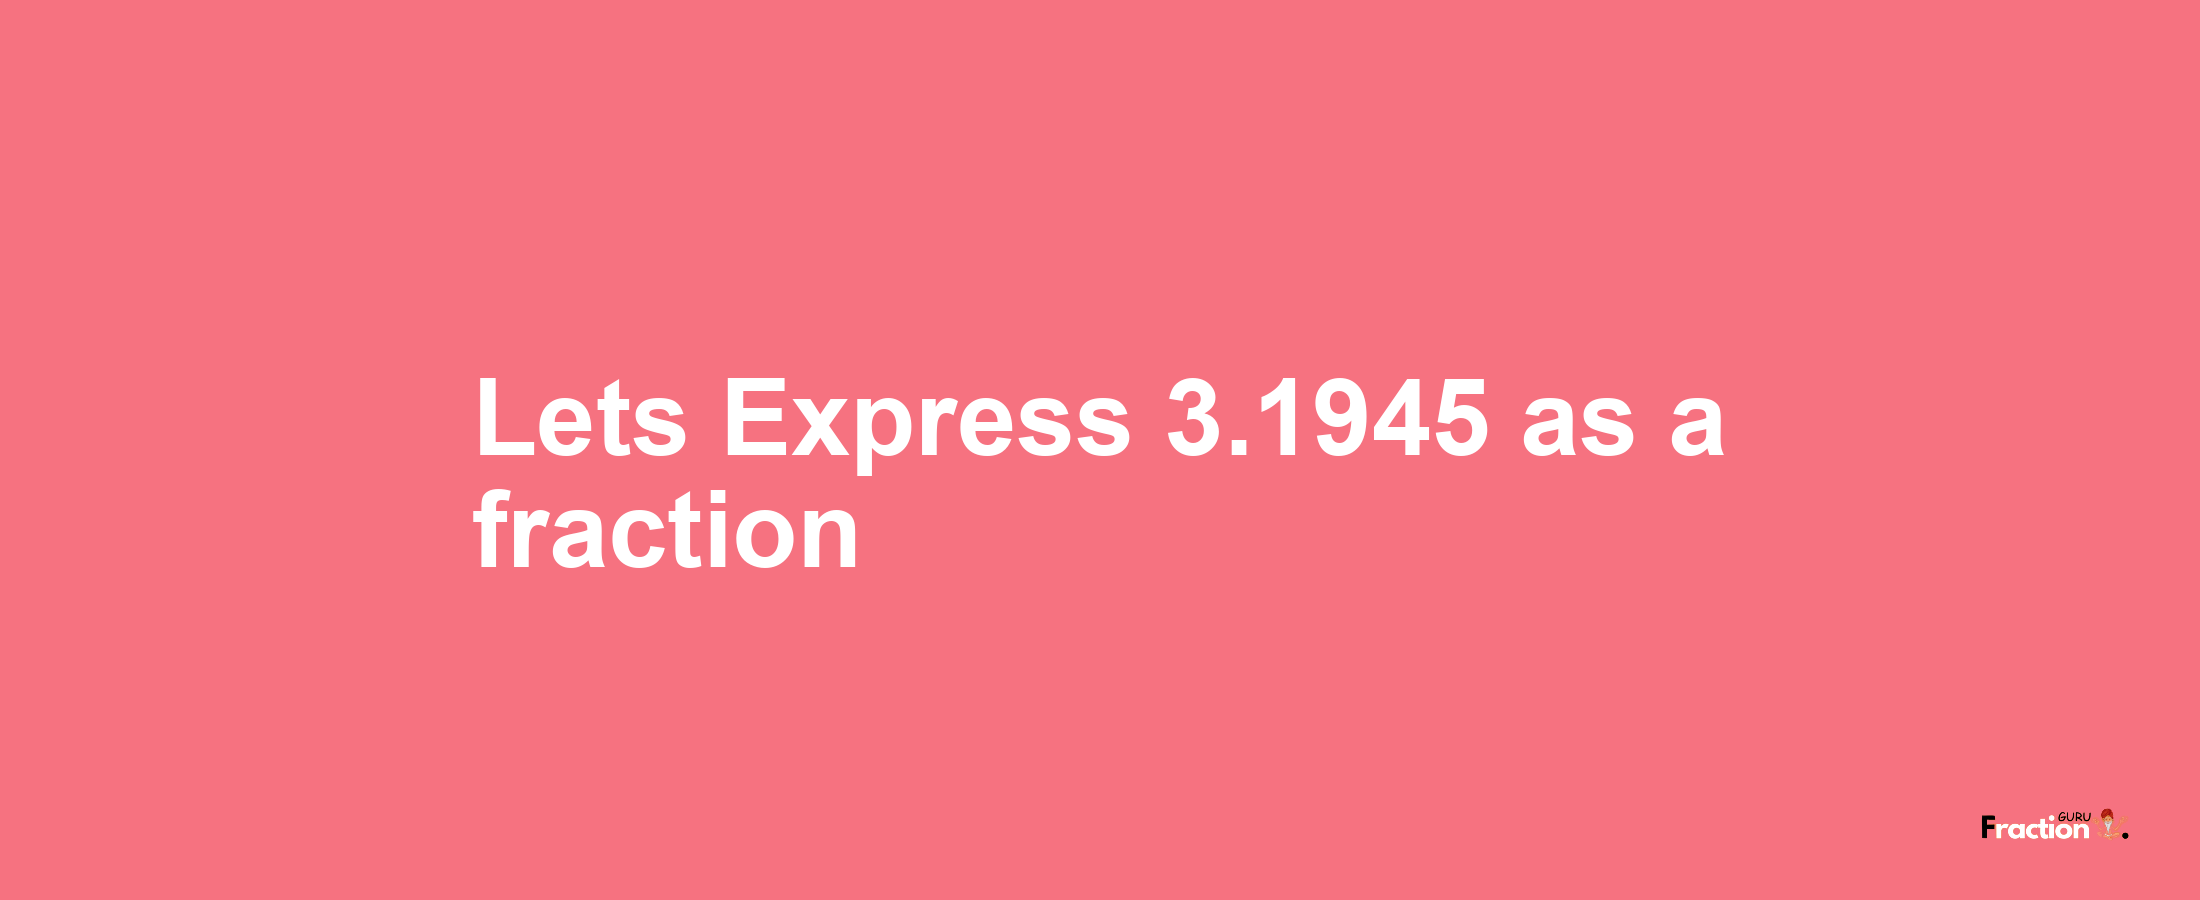 Lets Express 3.1945 as afraction